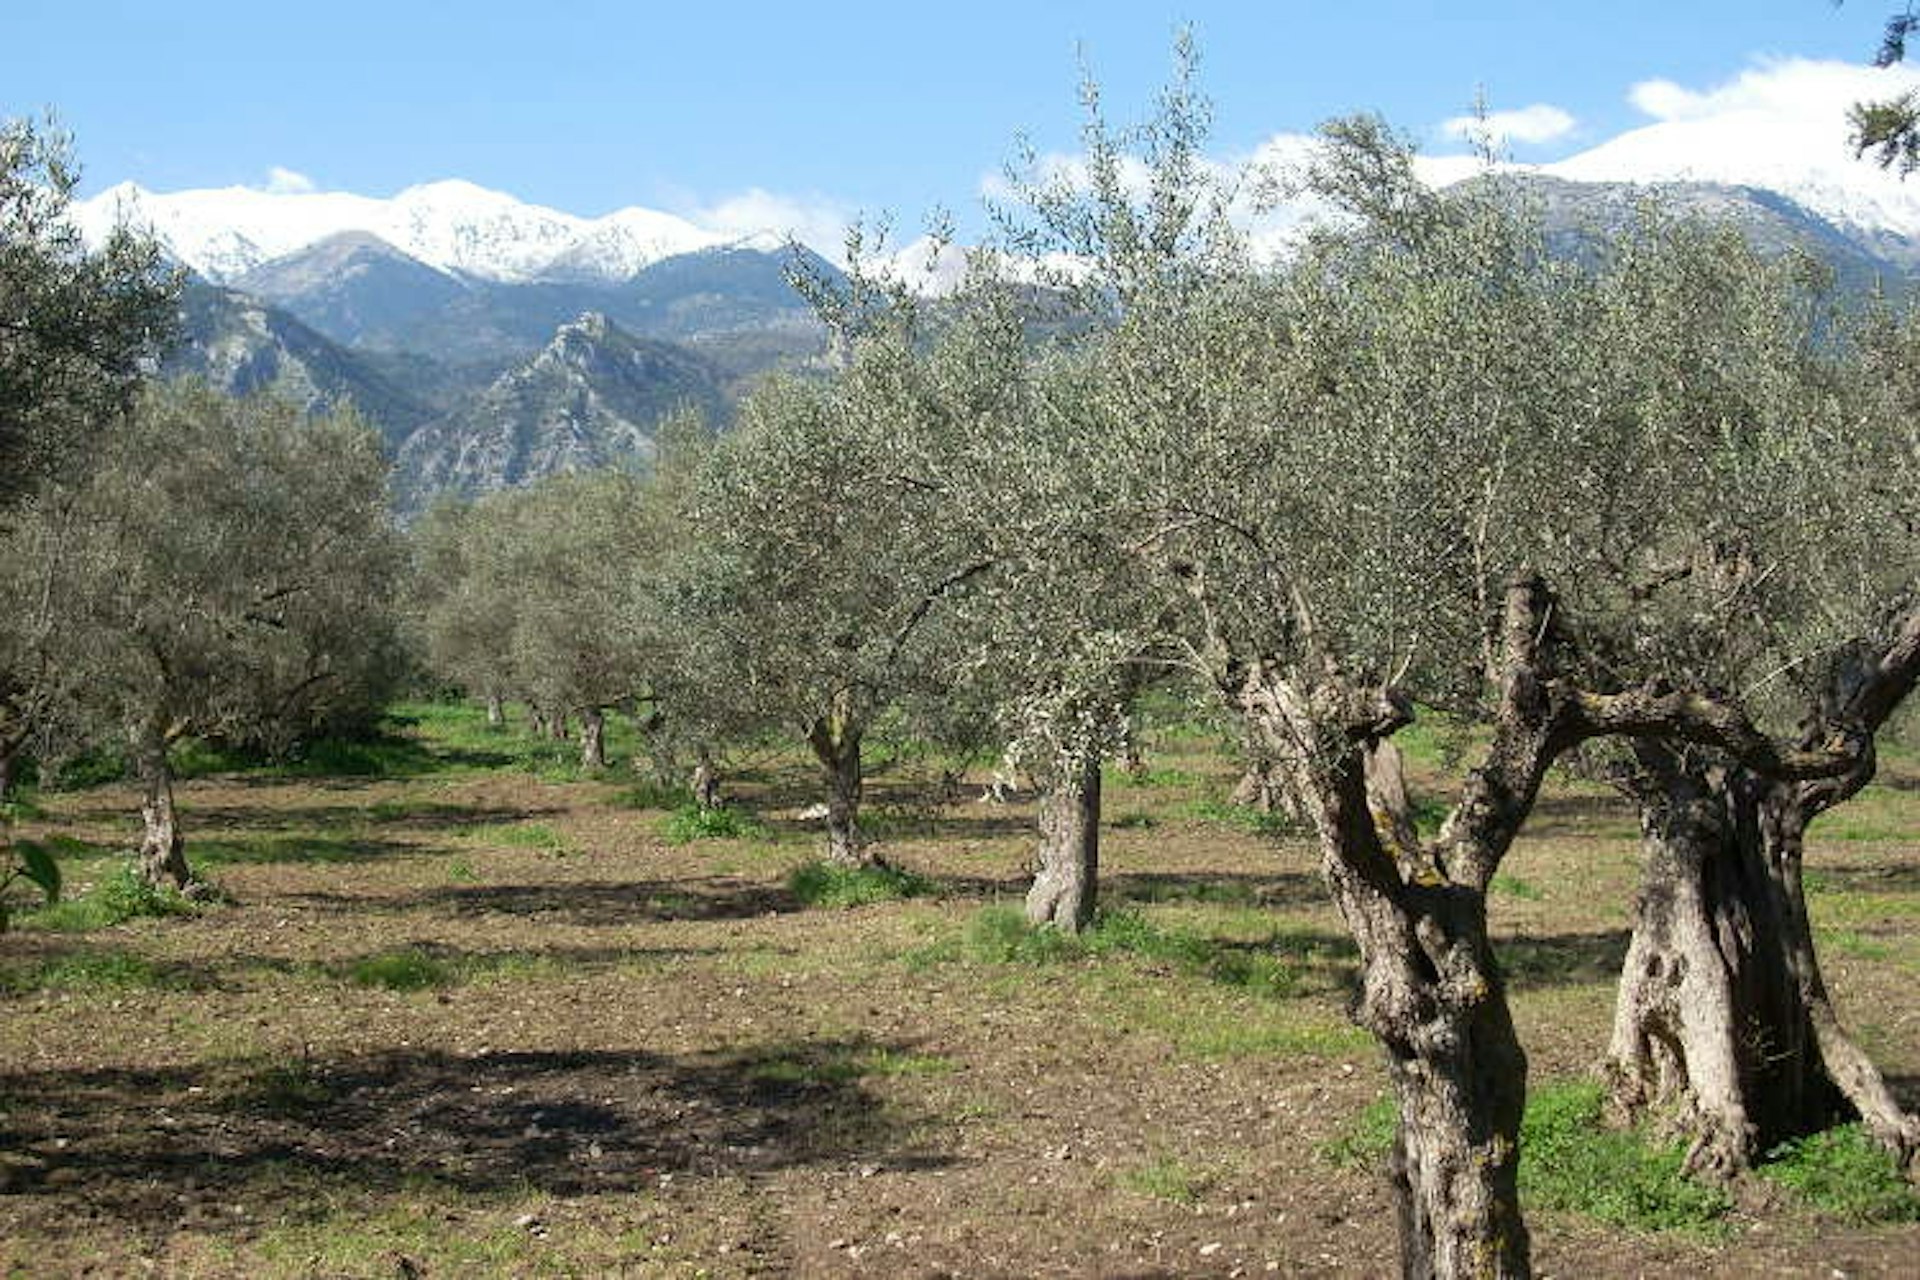 Olive groves and snow-capped peaks in the Peloponnese, where Richard Linklater's Before Midnight was shot. Alexis Averbuck / Lonely Planet